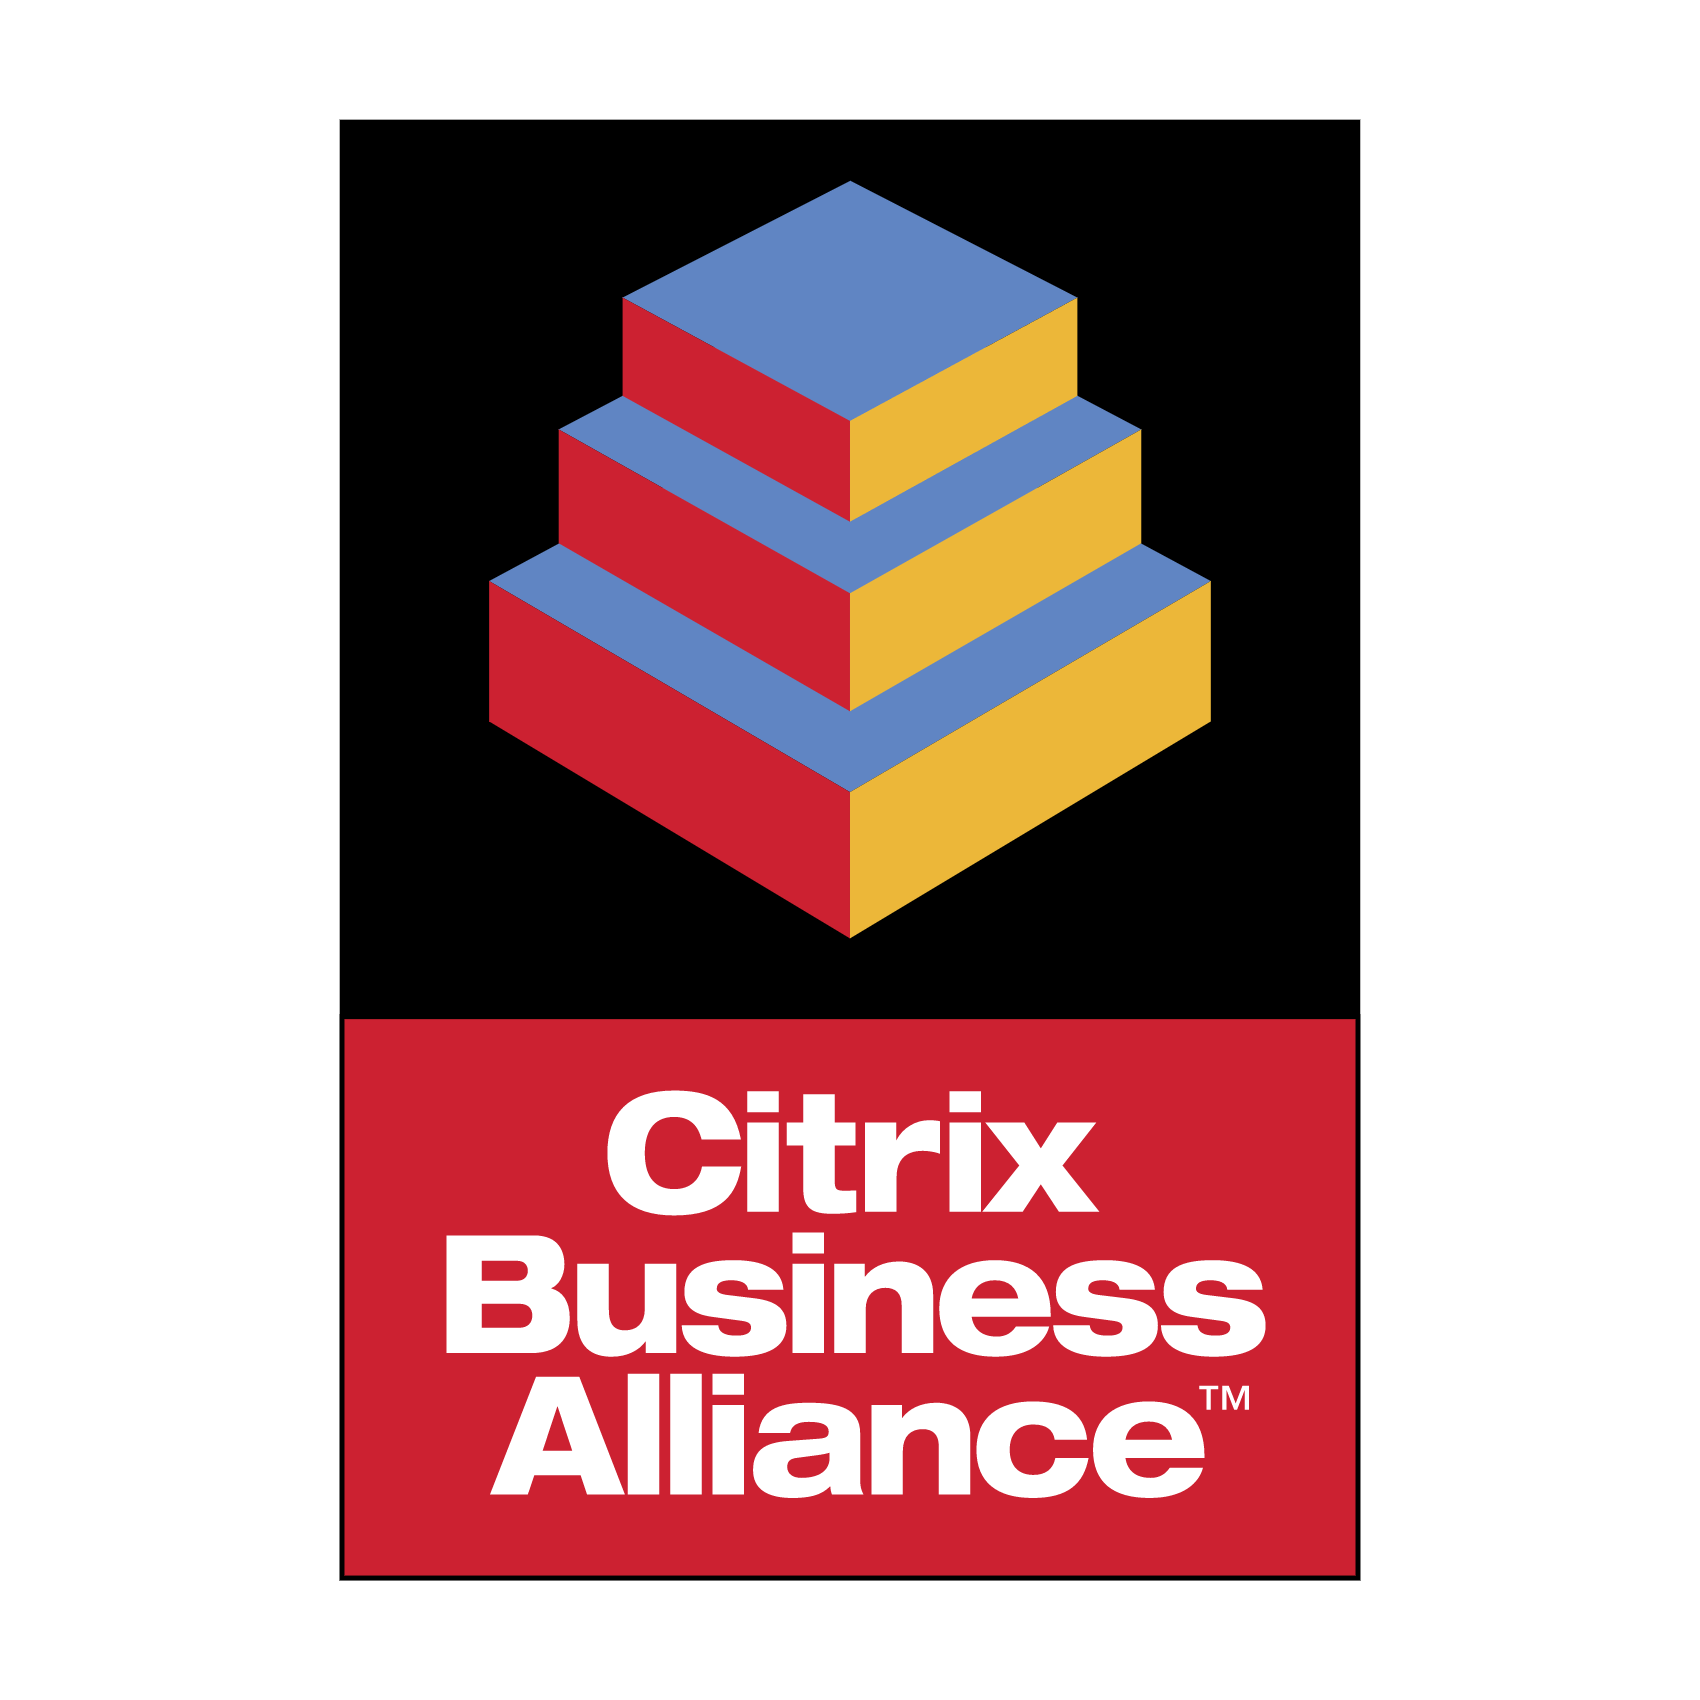 Download Citrix Business Logo PNG and Vector (PDF, SVG, Ai, EPS) Free